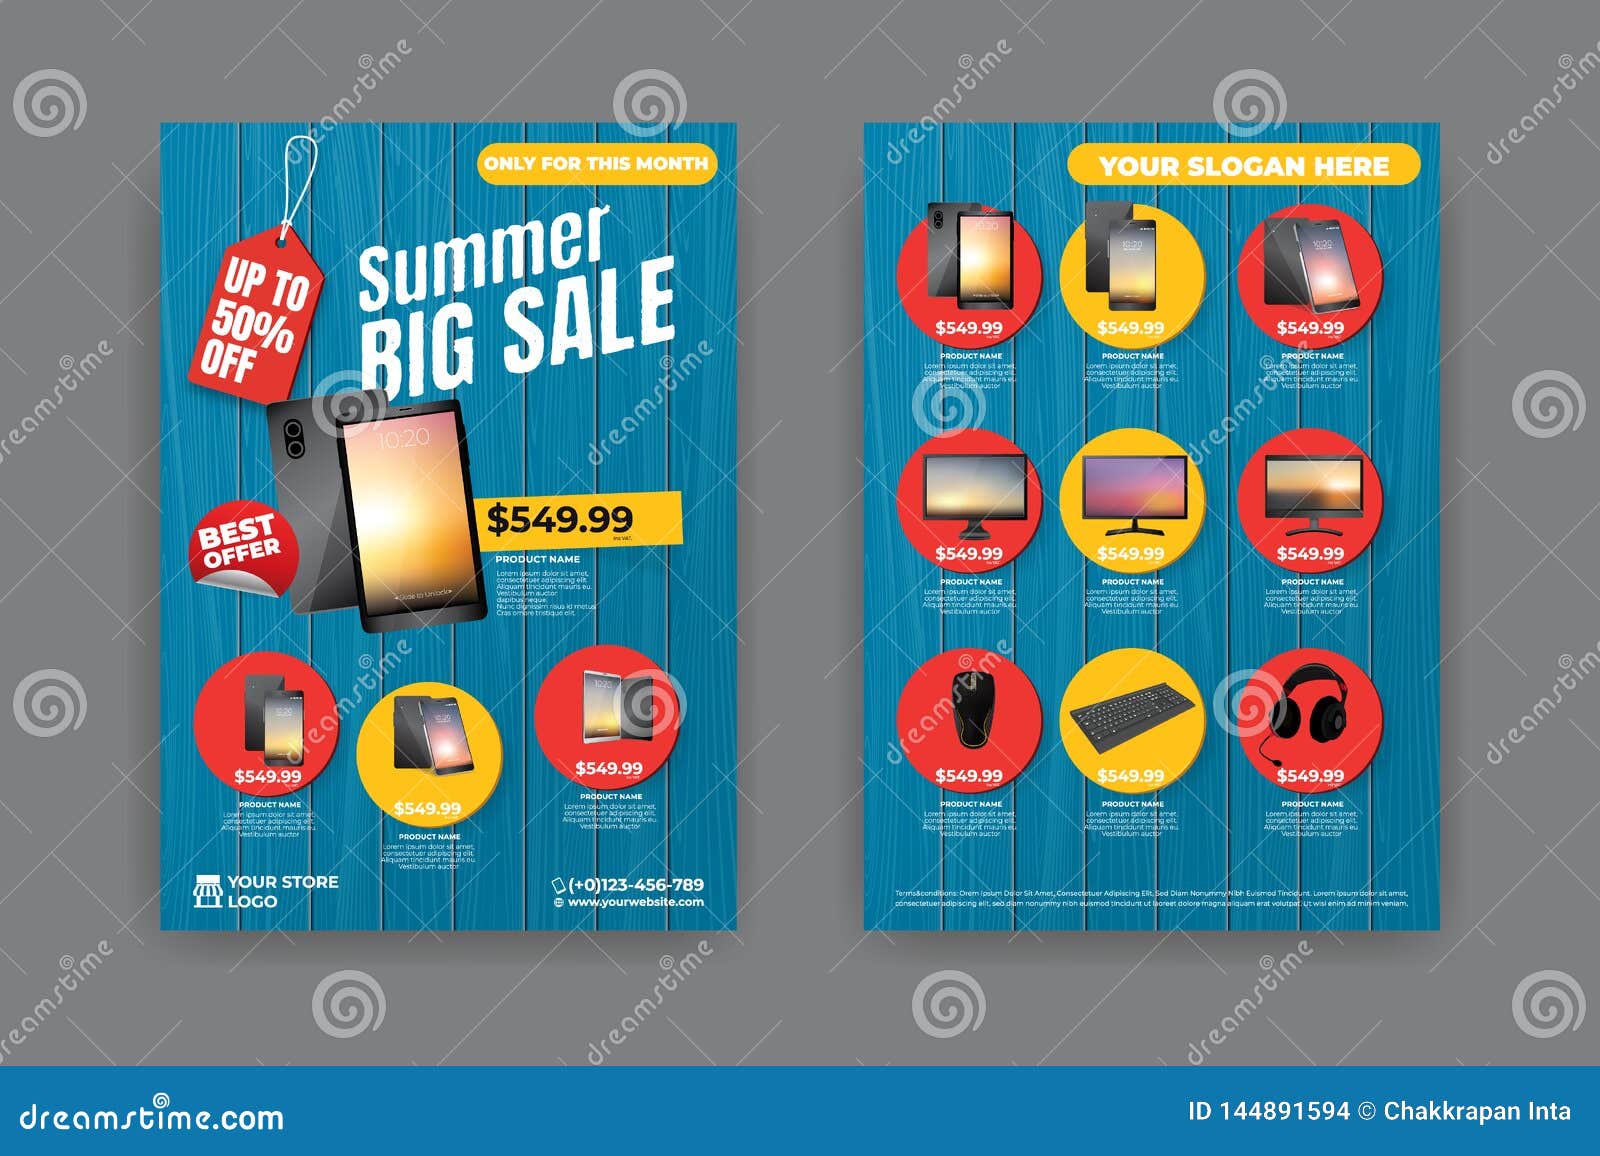 2 Sides Flyer Template For Summer Sale Promotion Stock Vector